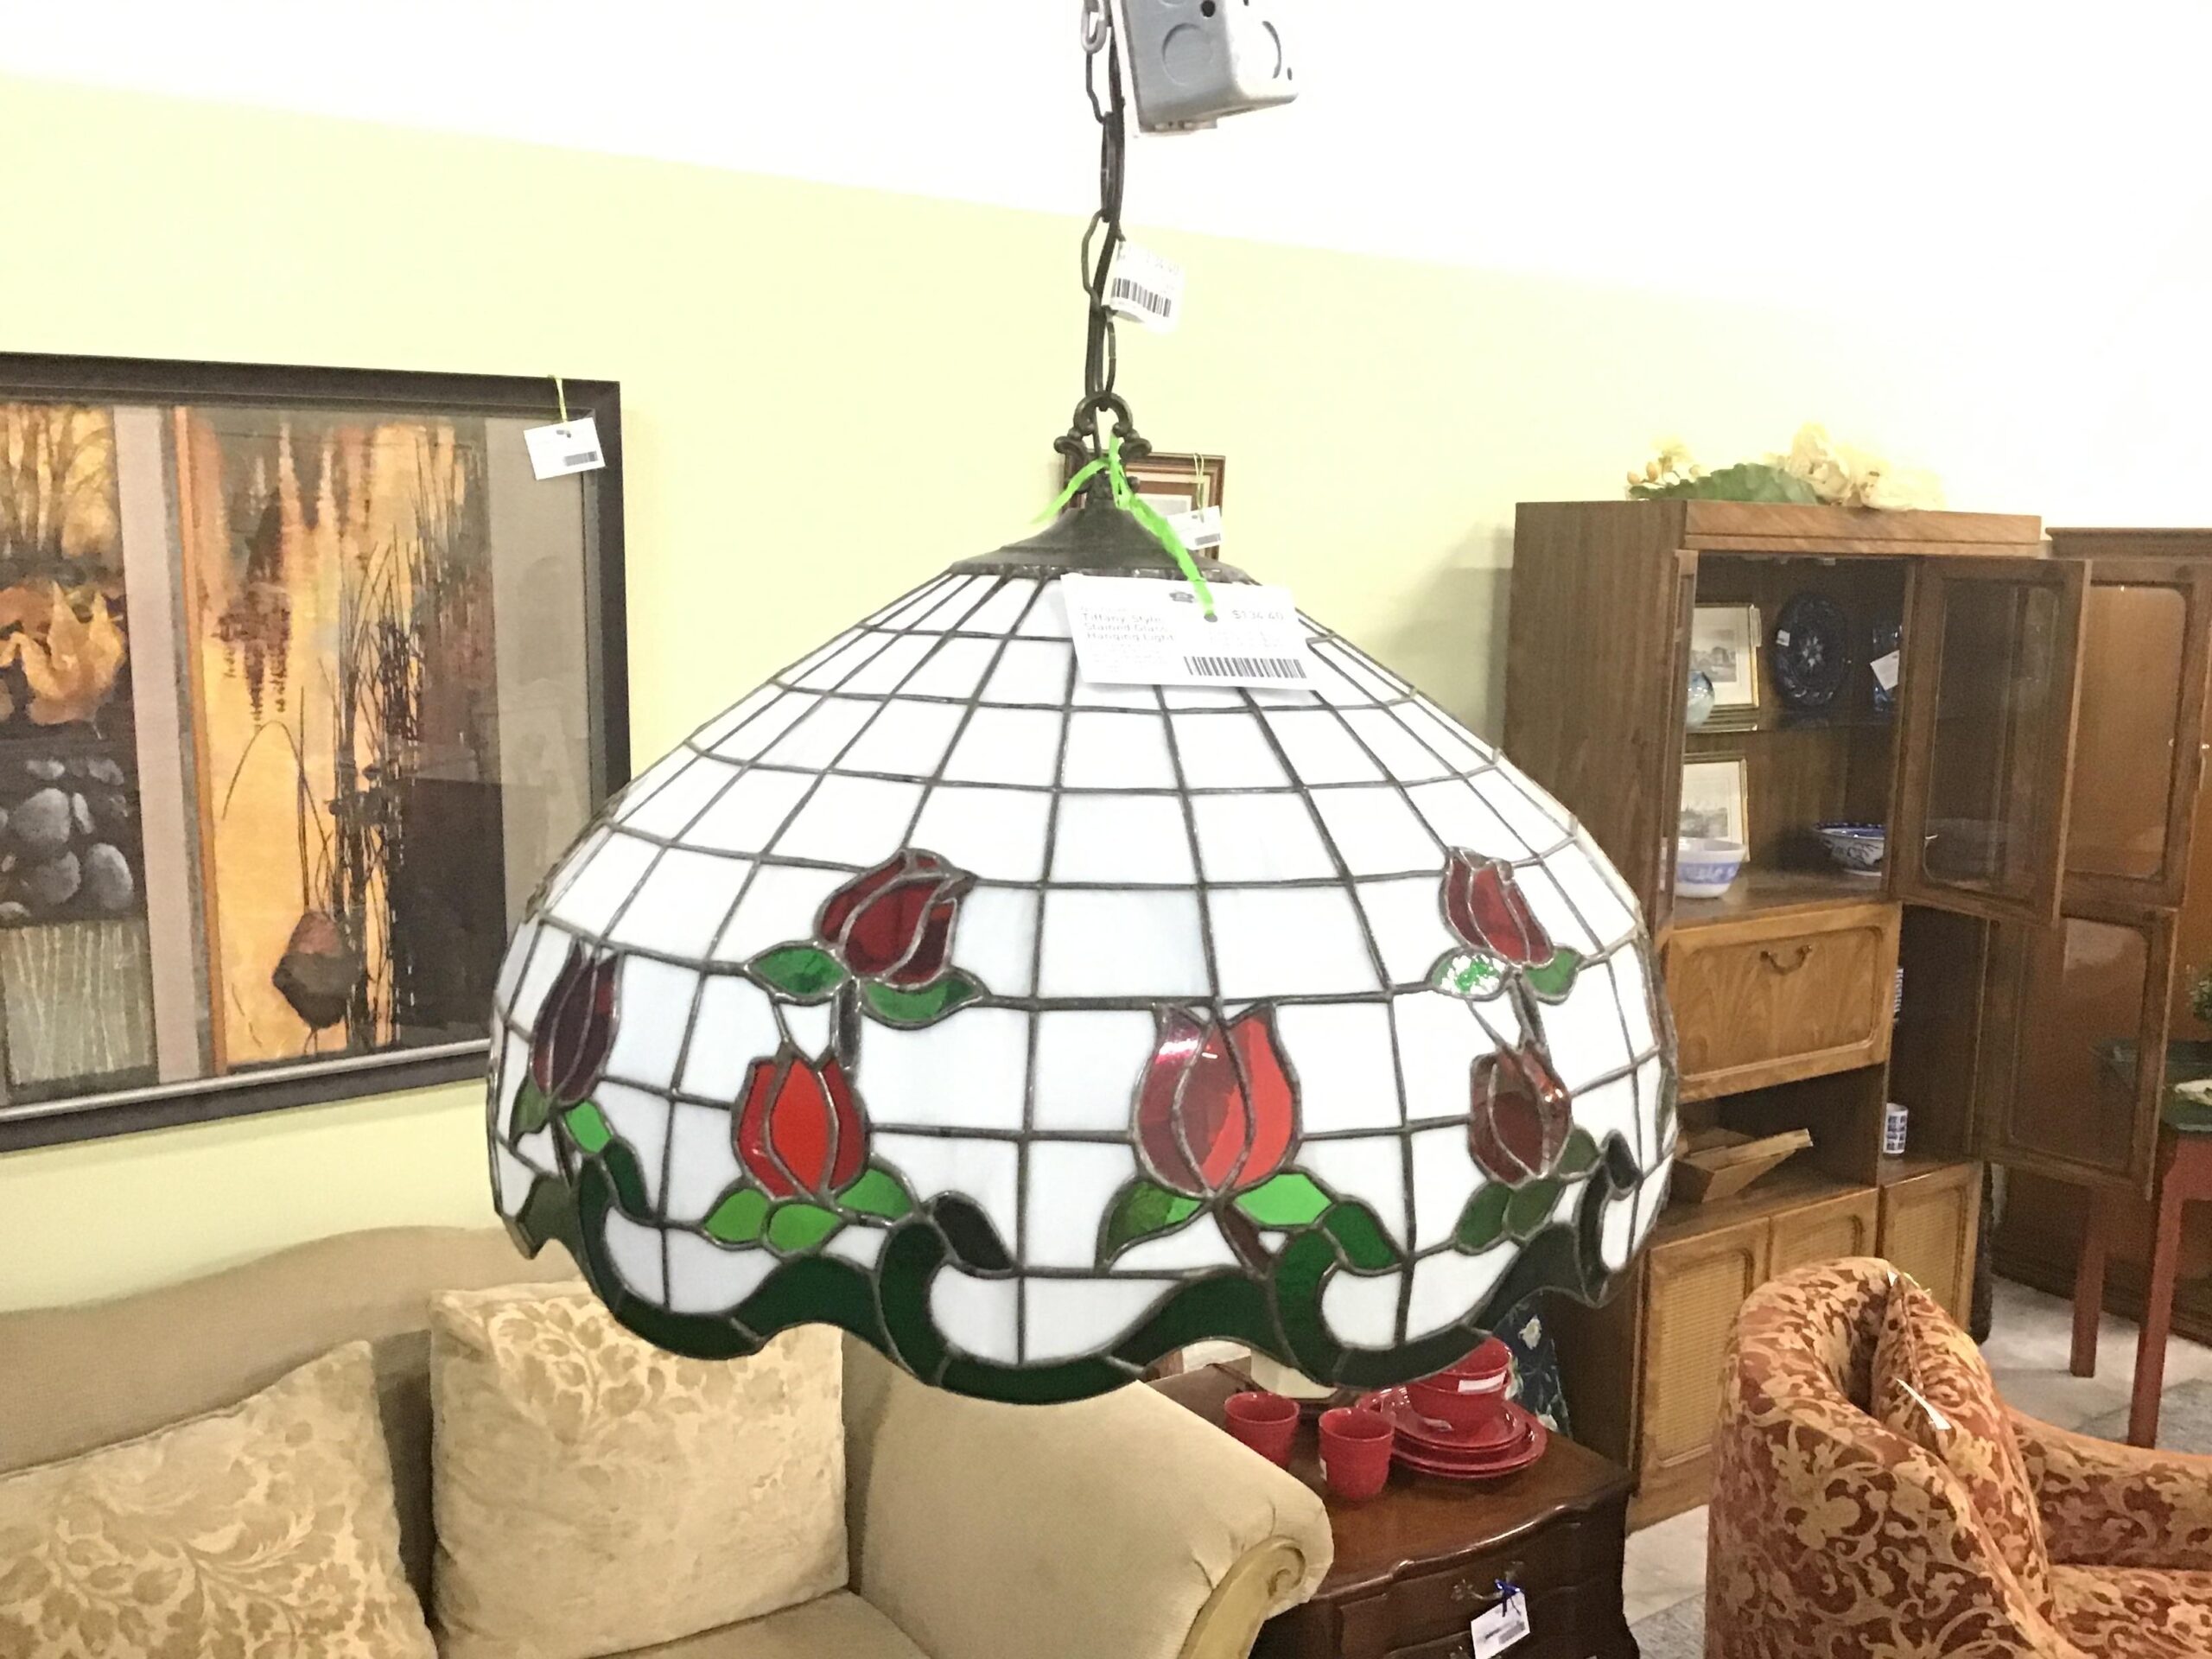 Tiffany-Style Stained Glass Hanging Light